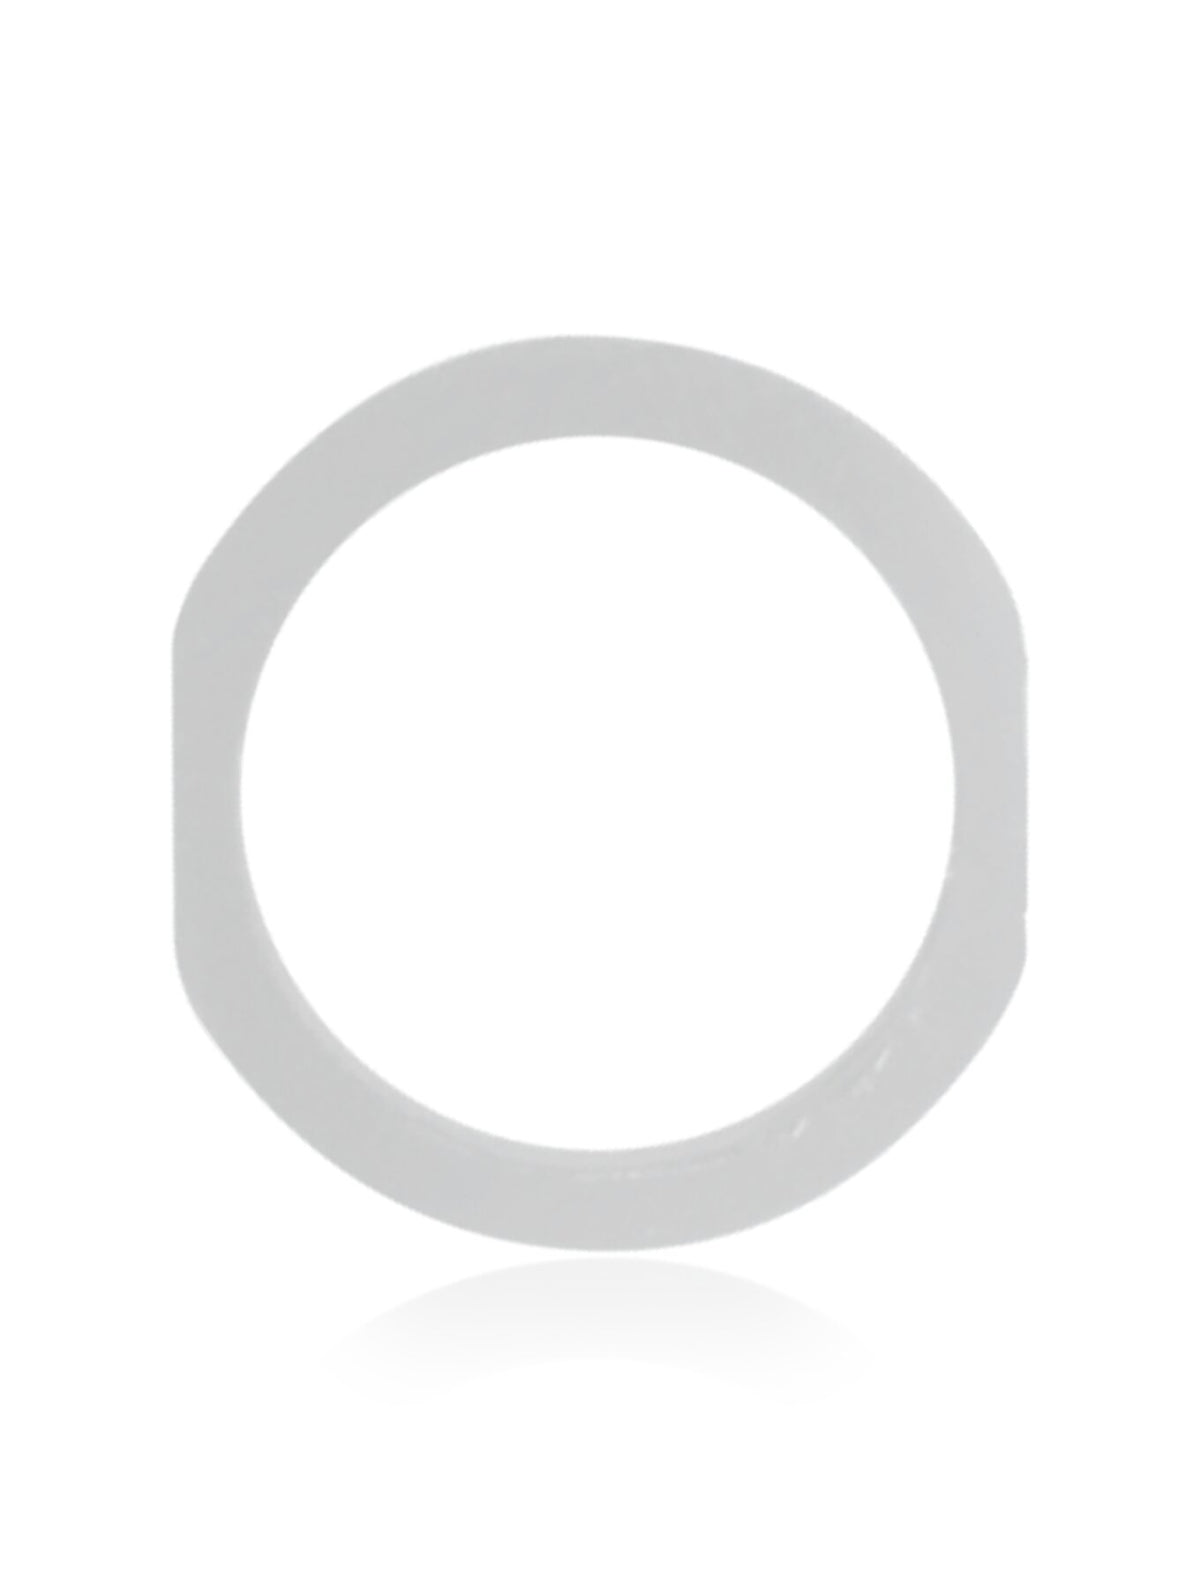 WHITE HOME BUTTON SPACER RING (10 PACK) COMPATIBLE WITH IPAD MINI 3 / AIR 2 / PRO 9.7"